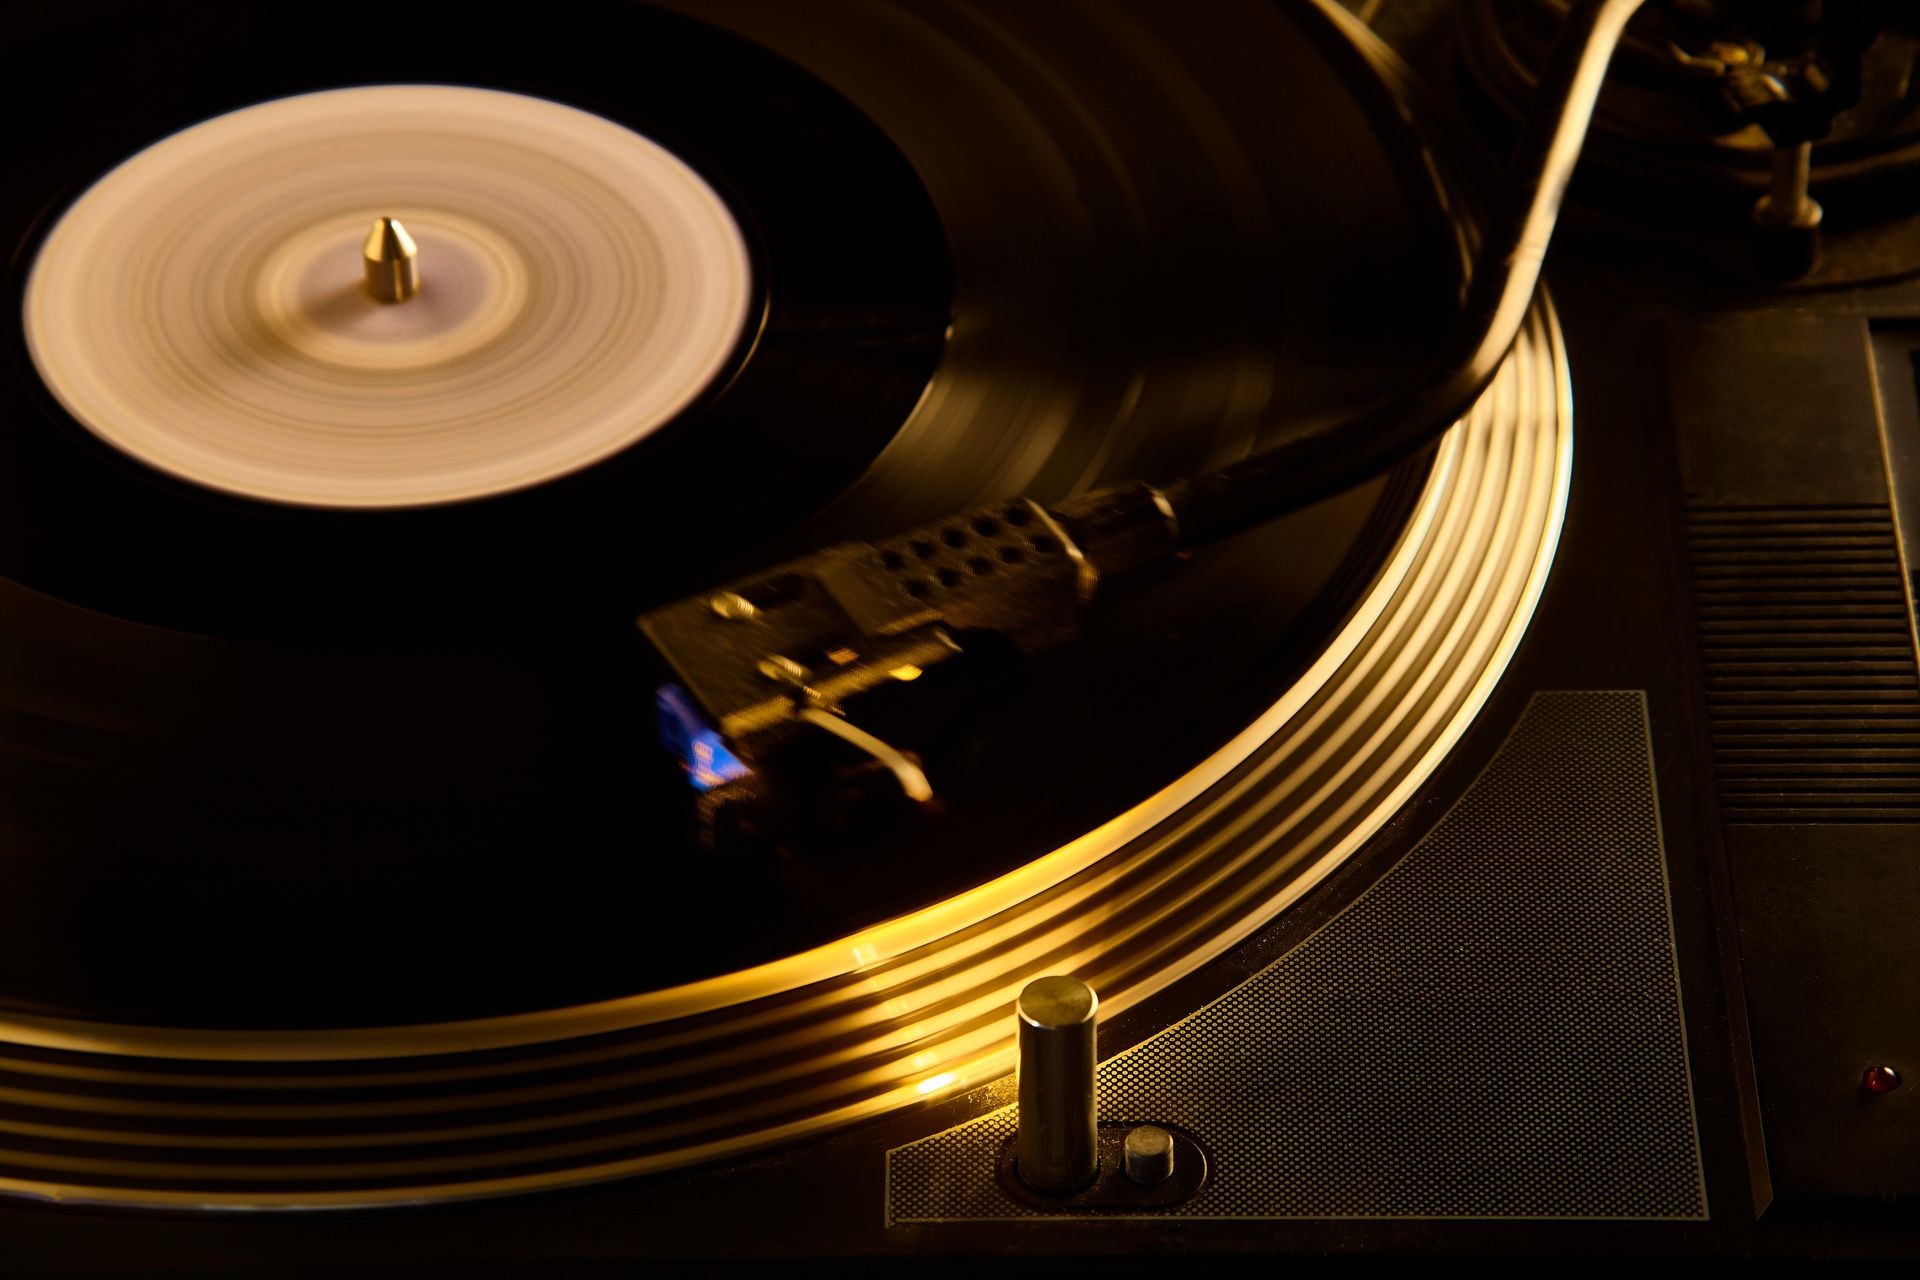 Vintage turntable with movement effect on the vinyl record while playing inside a disco.